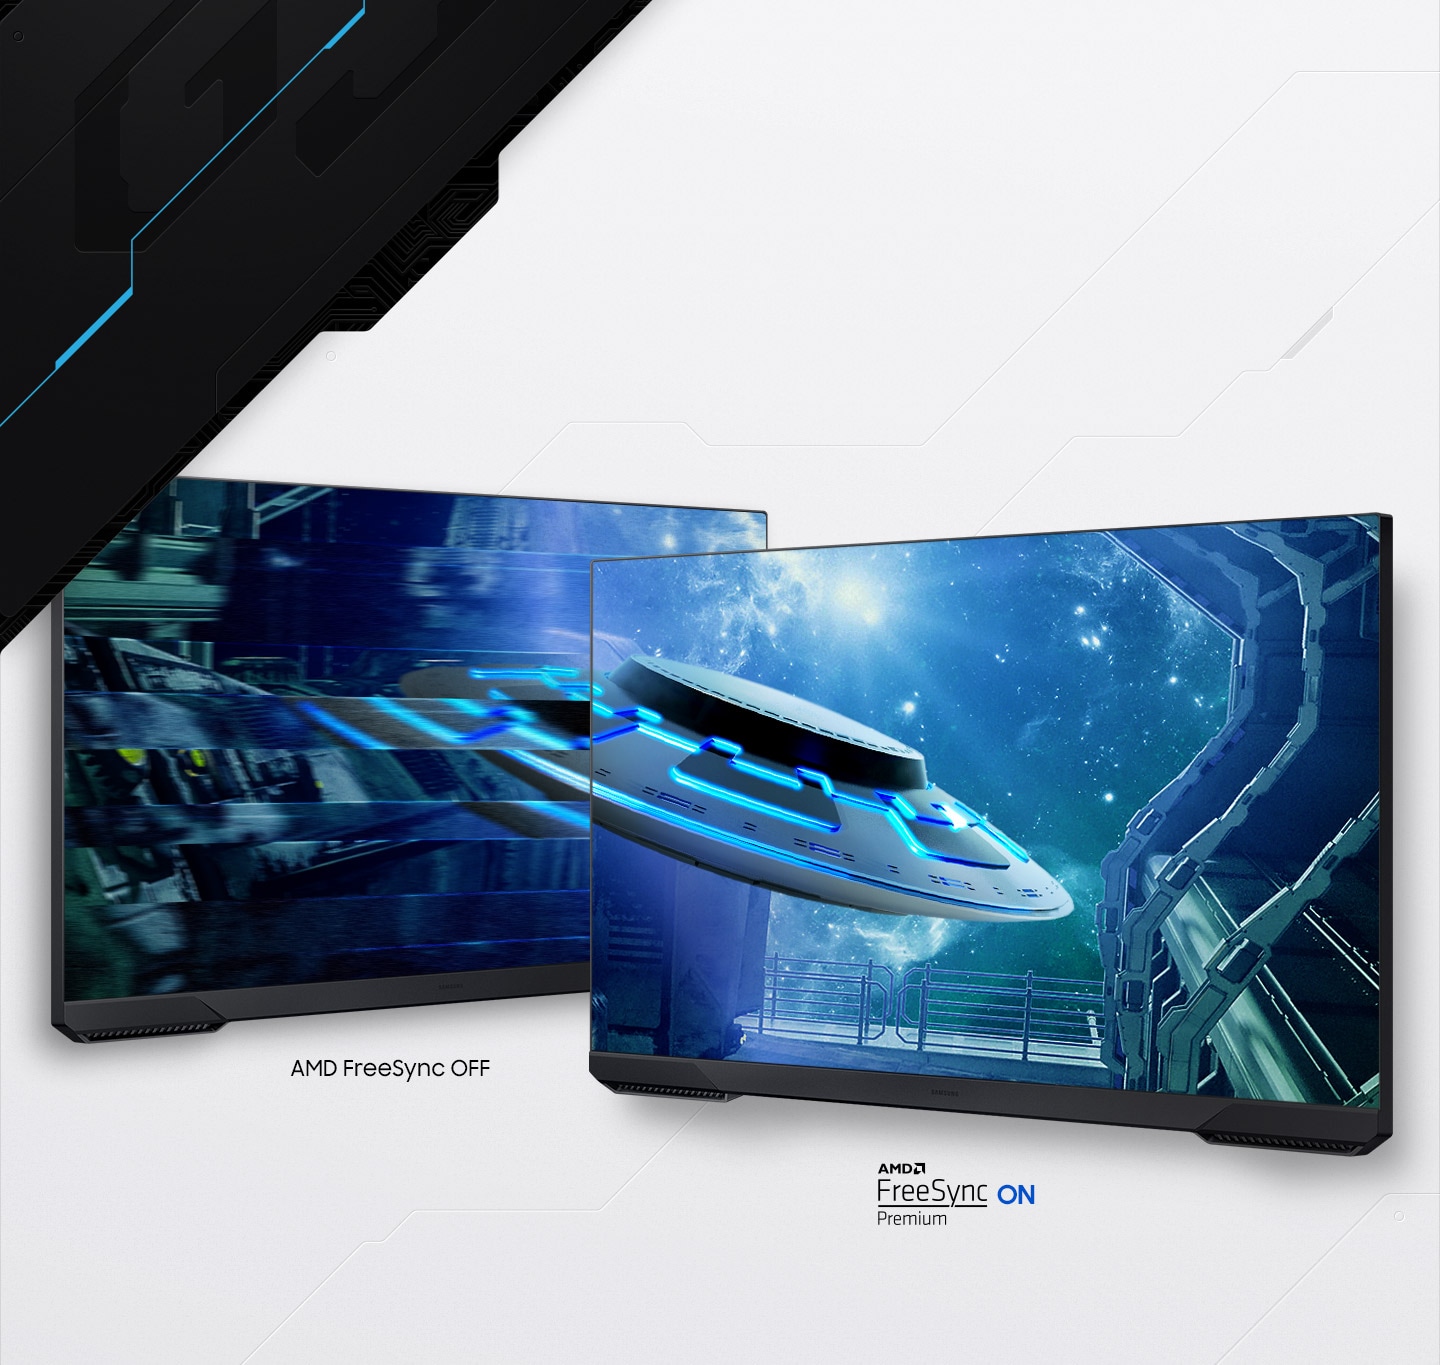 Two screens show the same spaceship scene flying through a larger hangar heading out into space.  The left screen with FreeSync turned off displayed a jittery, intermittent image.  while the screen on the right with FreeSync Premium on shows perfectly crisp images of the spaceships.